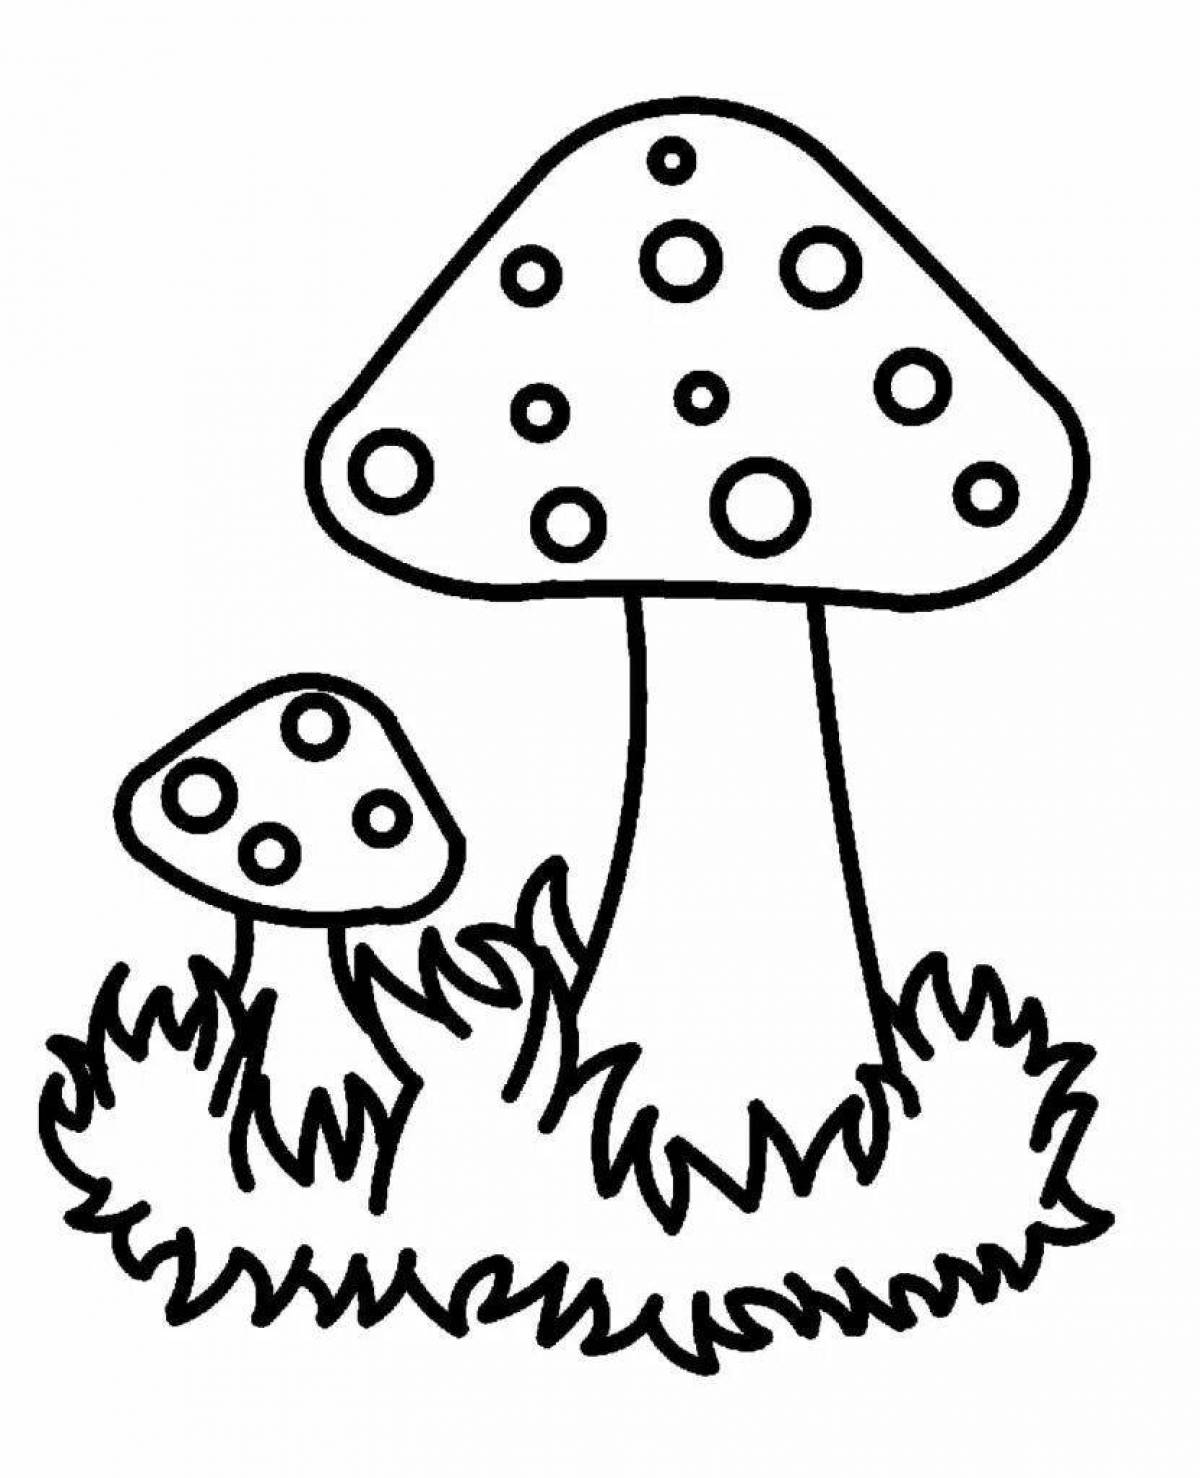 Fairy mushroom coloring pages for 3-4 year olds